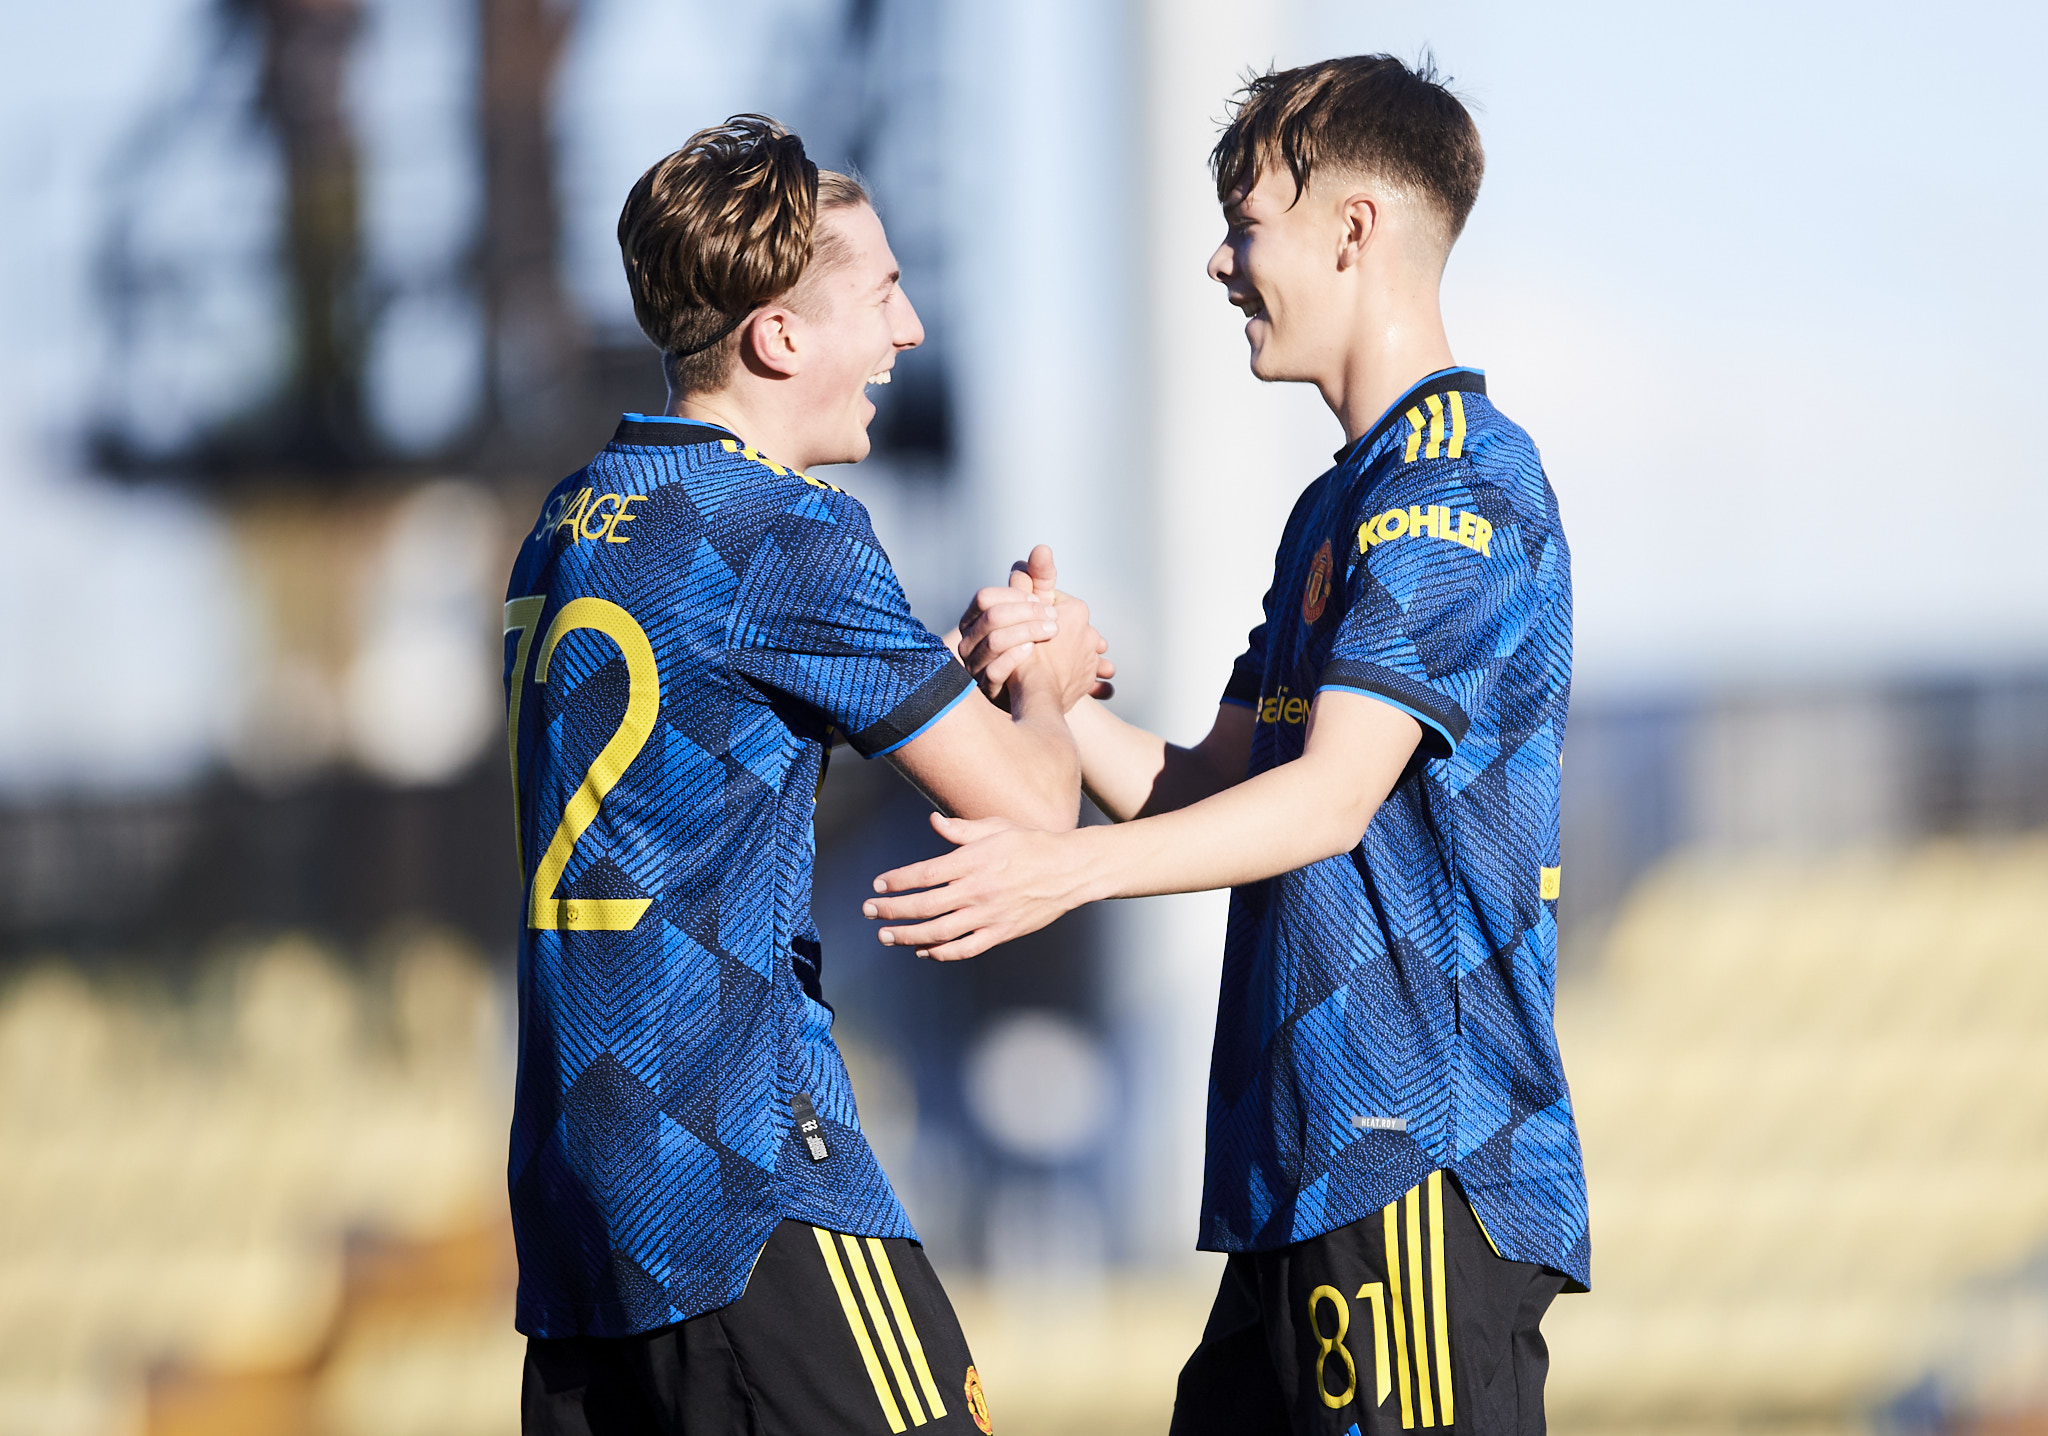 Zidane Iqbal claimed it was a special feeling for him and Charlie Savage (R) to make their Manchester United debut together. (Photo by Aitor Alcalde/Getty Images)